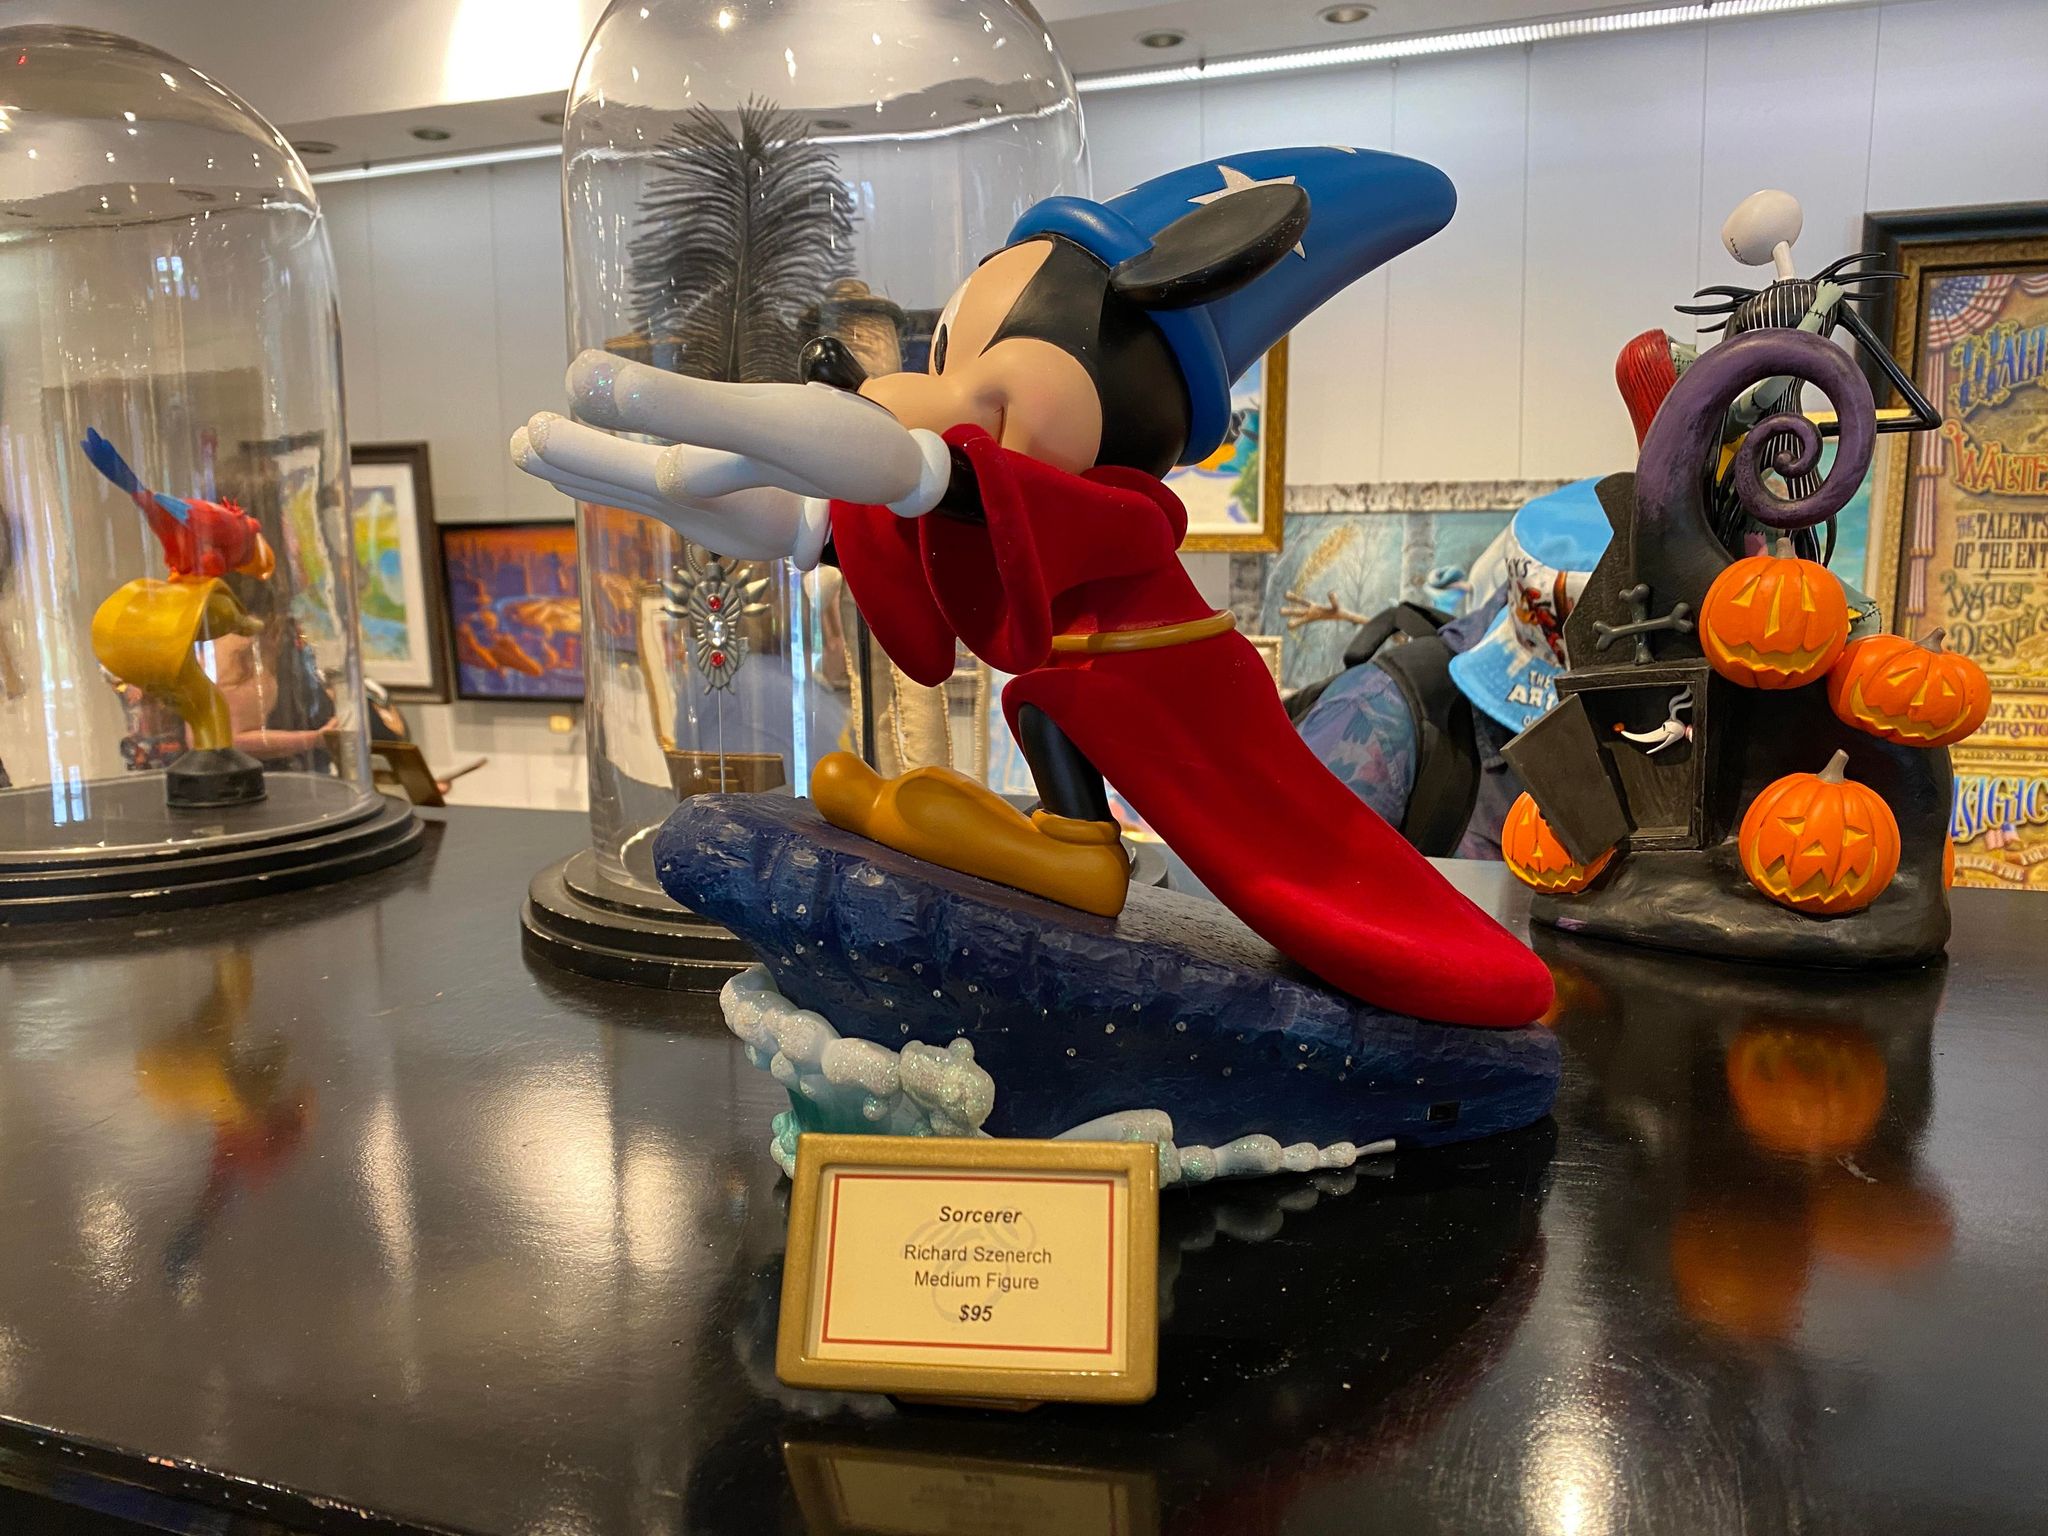 Profile of Sorcerer Mickey Statue at Art of Disney